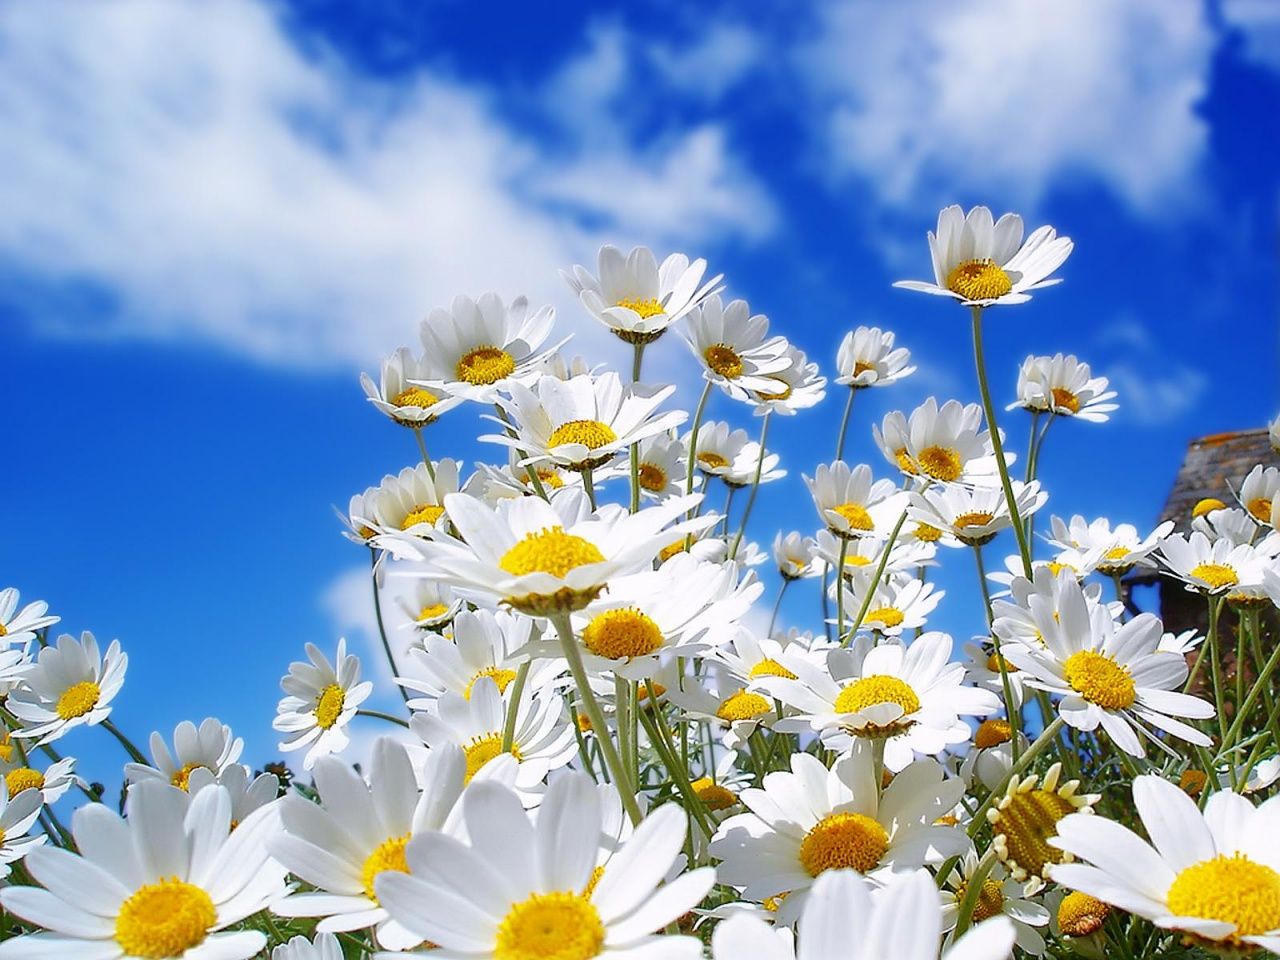 Free download 1280x1024 Spring Daisy desktop PC and Mac wallpaper [1280x960] for your Desktop, Mobile & Tablet. Explore Spring Wallpaper 1280 X 1024. Spring Wallpaper Image, Spring Flower Wallpaper, Spring Wallpaper For Desktop